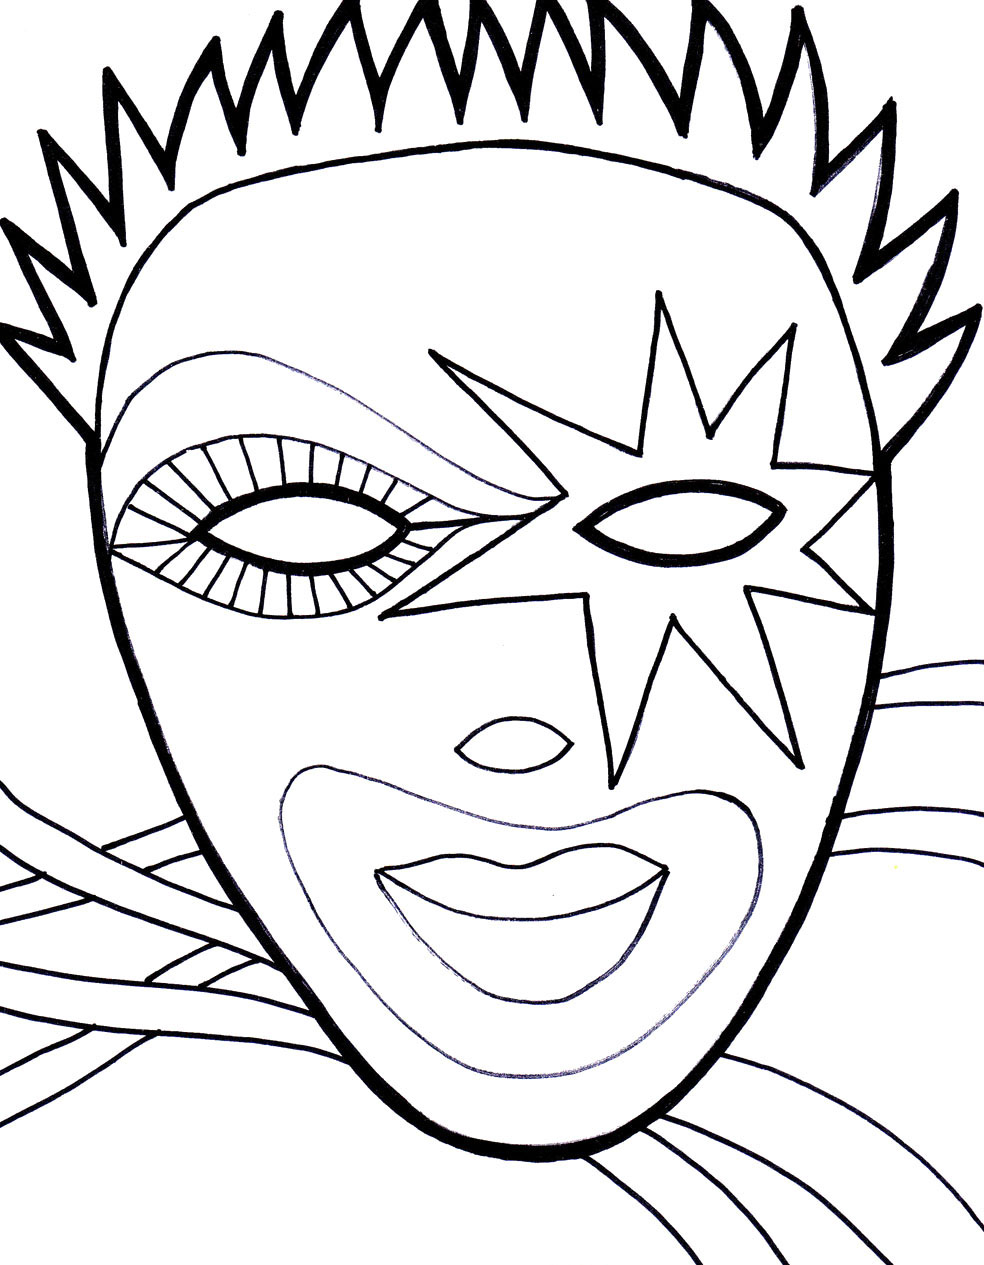 Print And Color Mask Coloring Pages - Coloring Cool